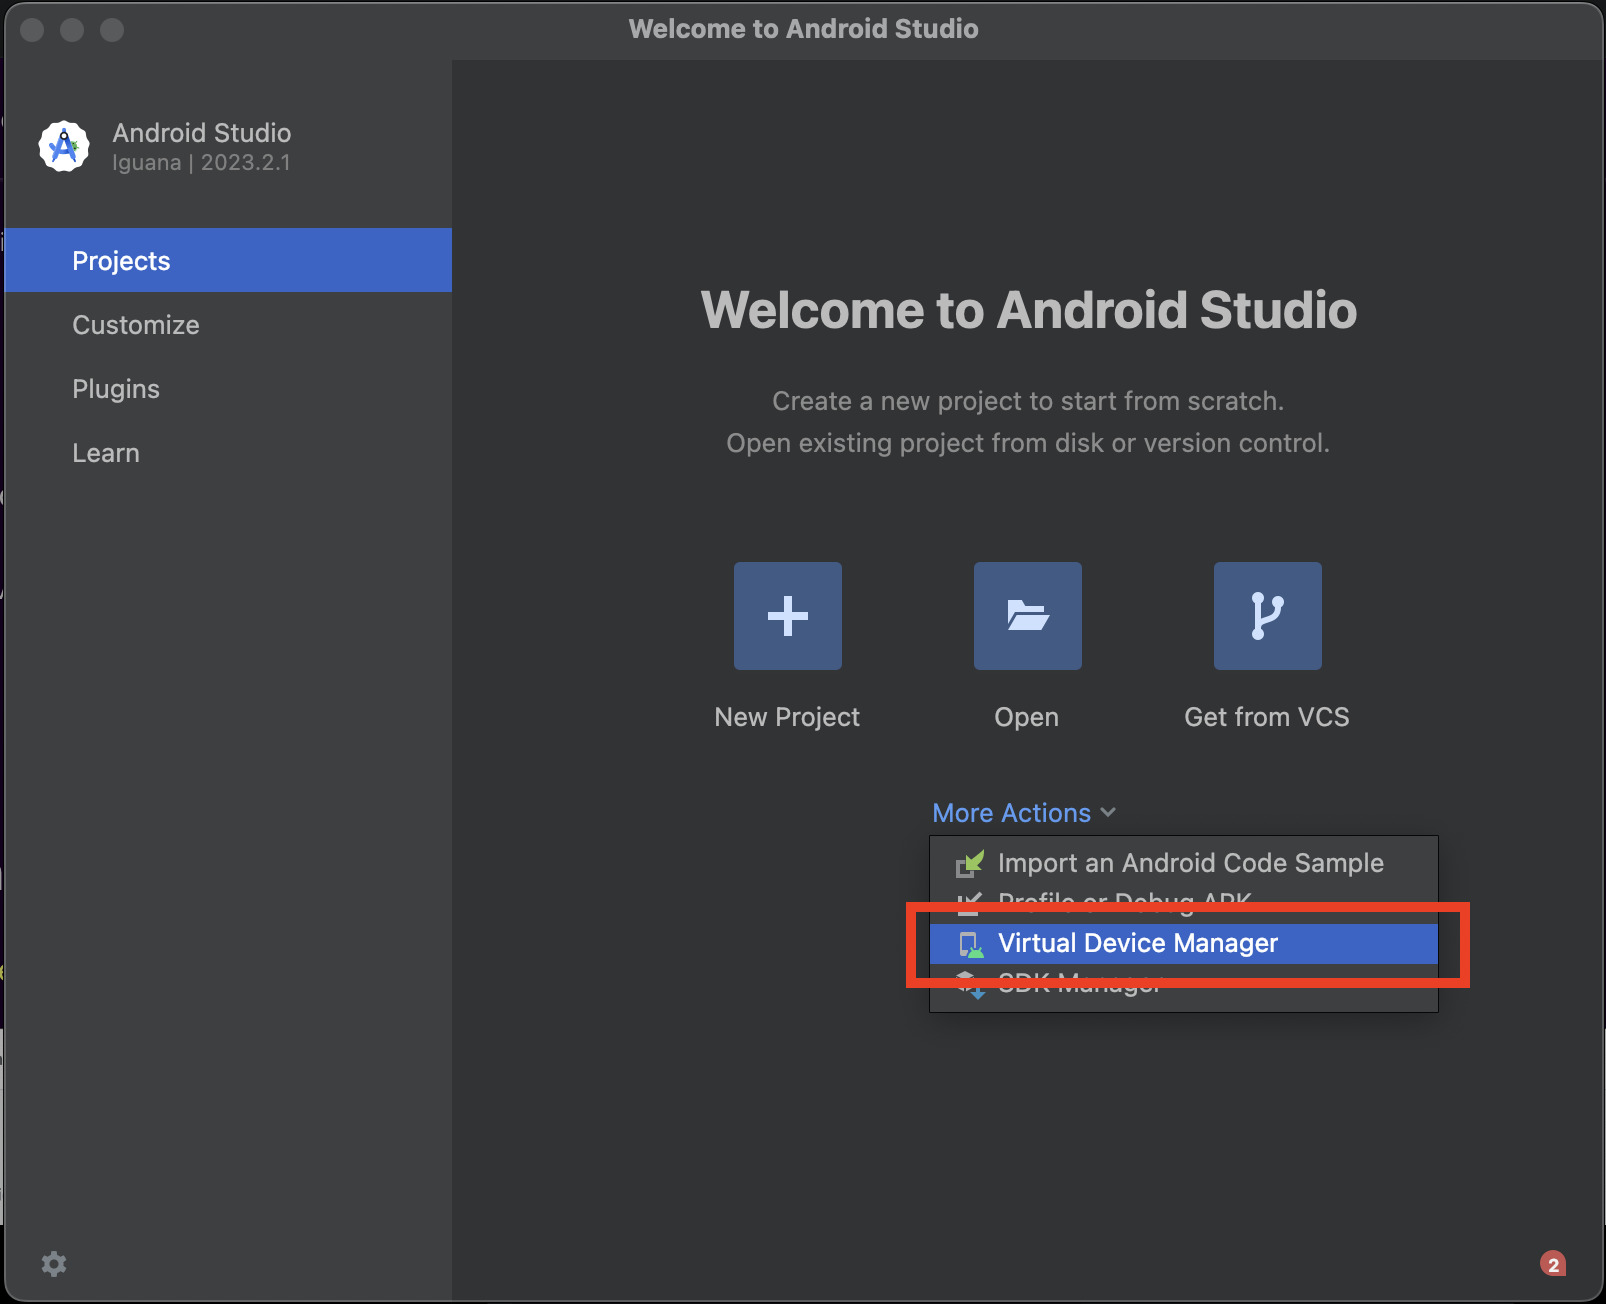 android-studio-versions-everything-you-need-to-know